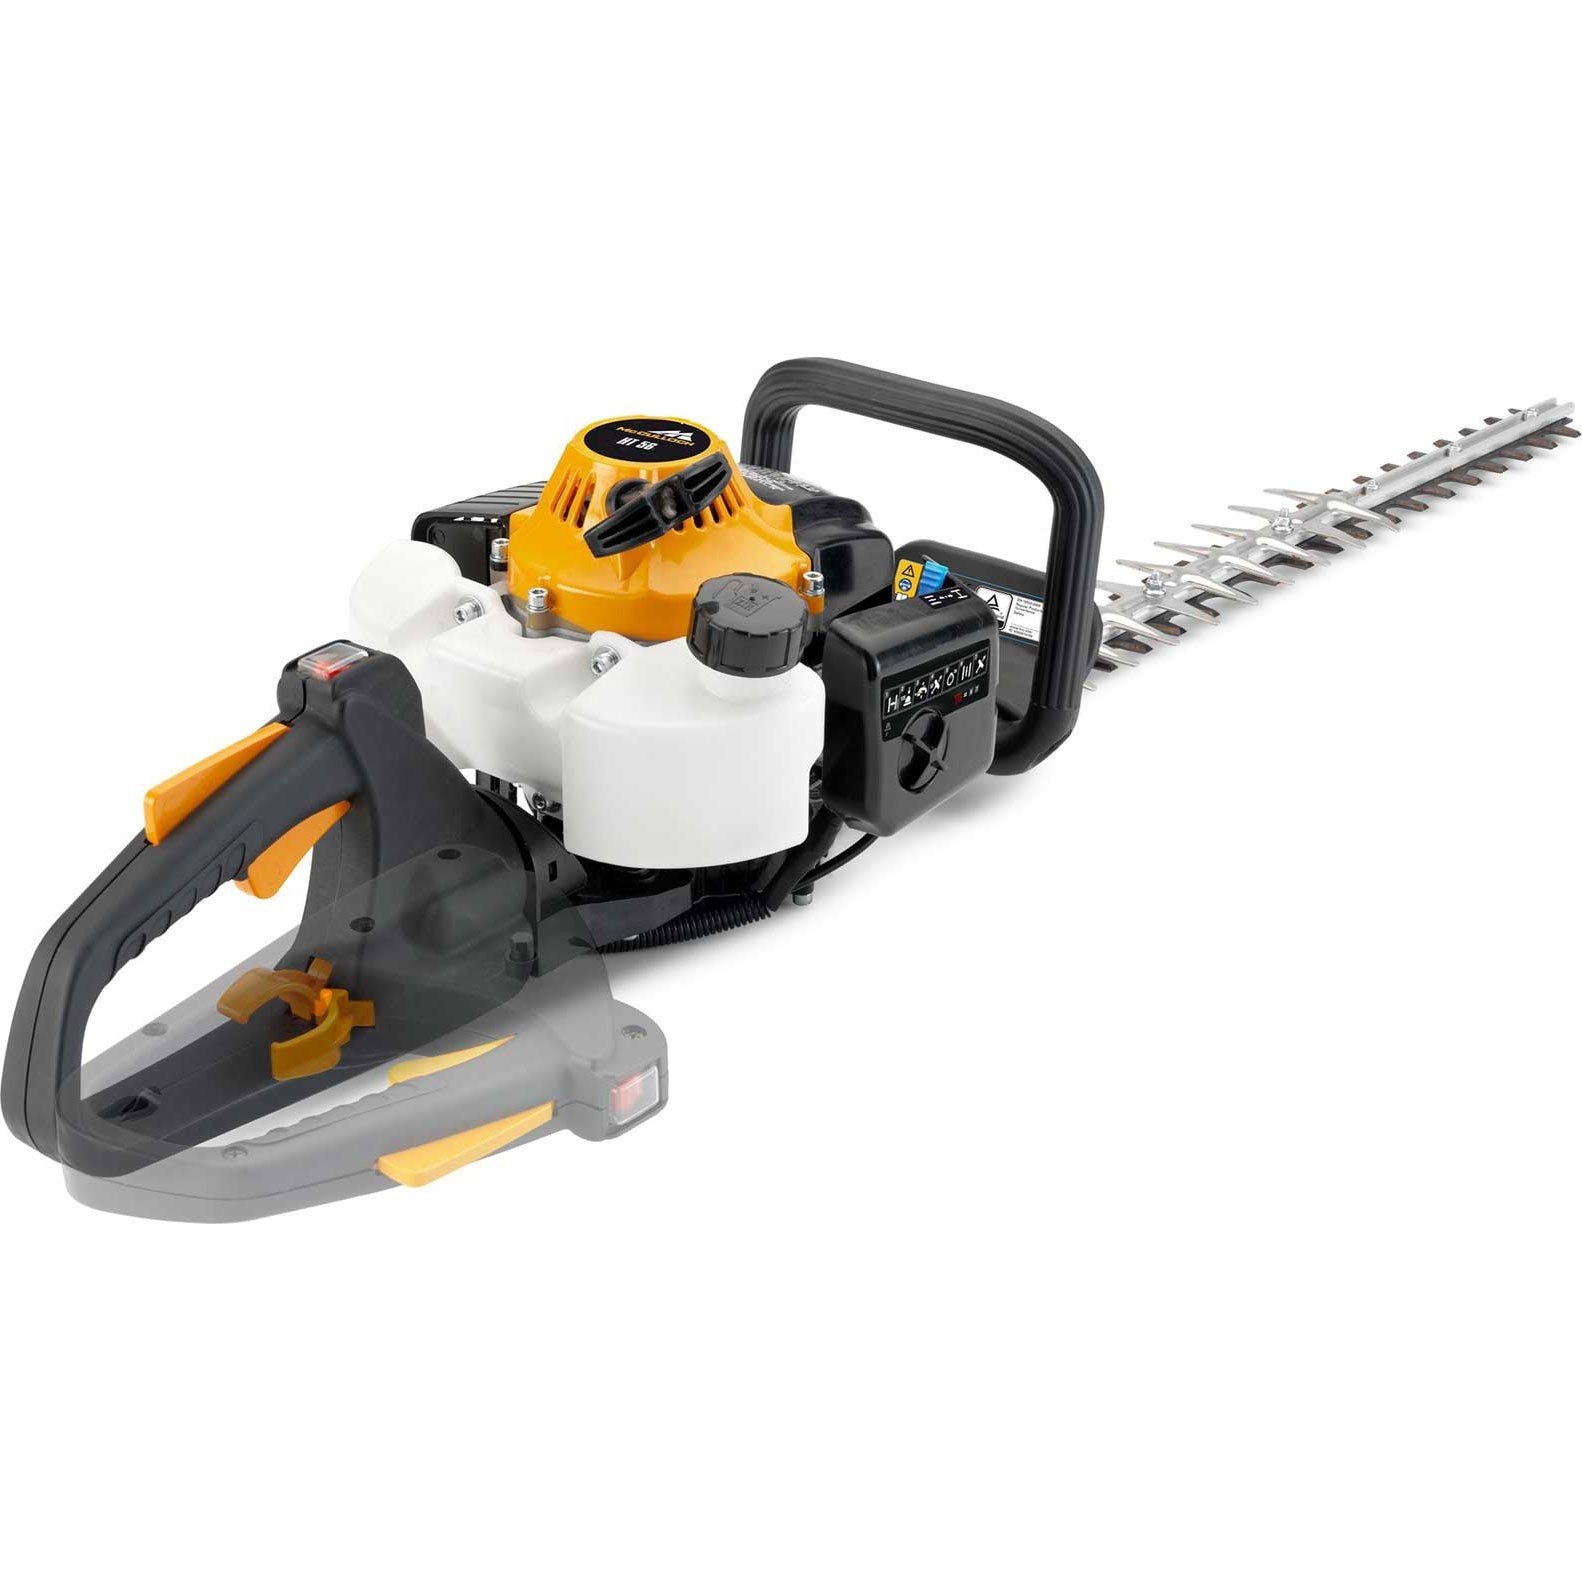 McCulloch HT 5622 Petrol Powered Hedge Trimmer – 22.7cc – Garden Strimmer – Spare And Square